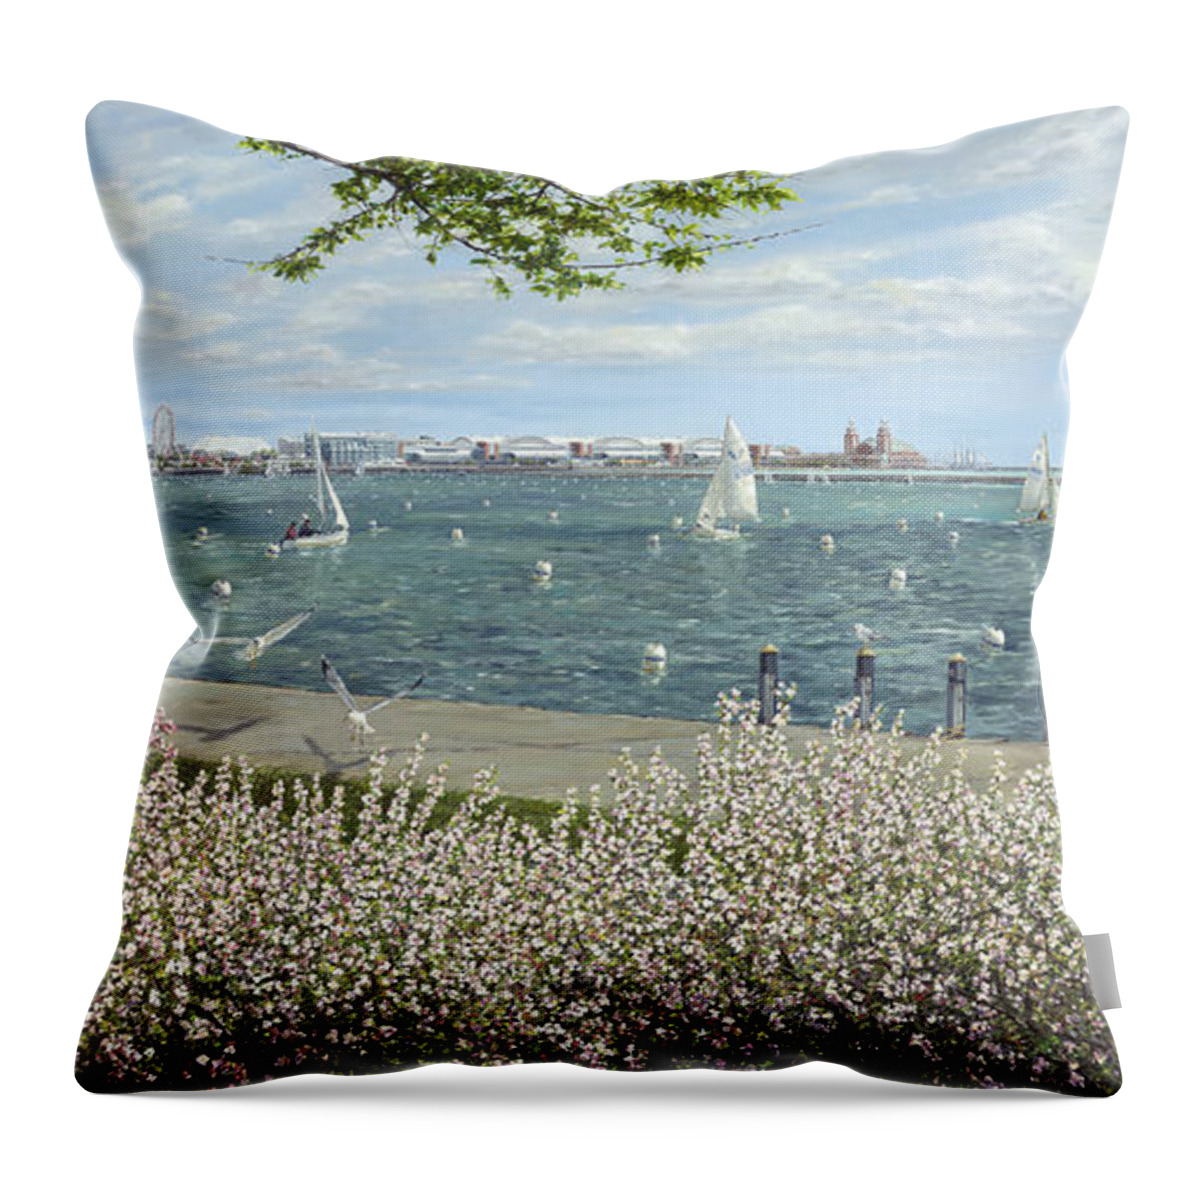 Spring Tidings Throw Pillow featuring the painting Spring Tidings by Doug Kreuger